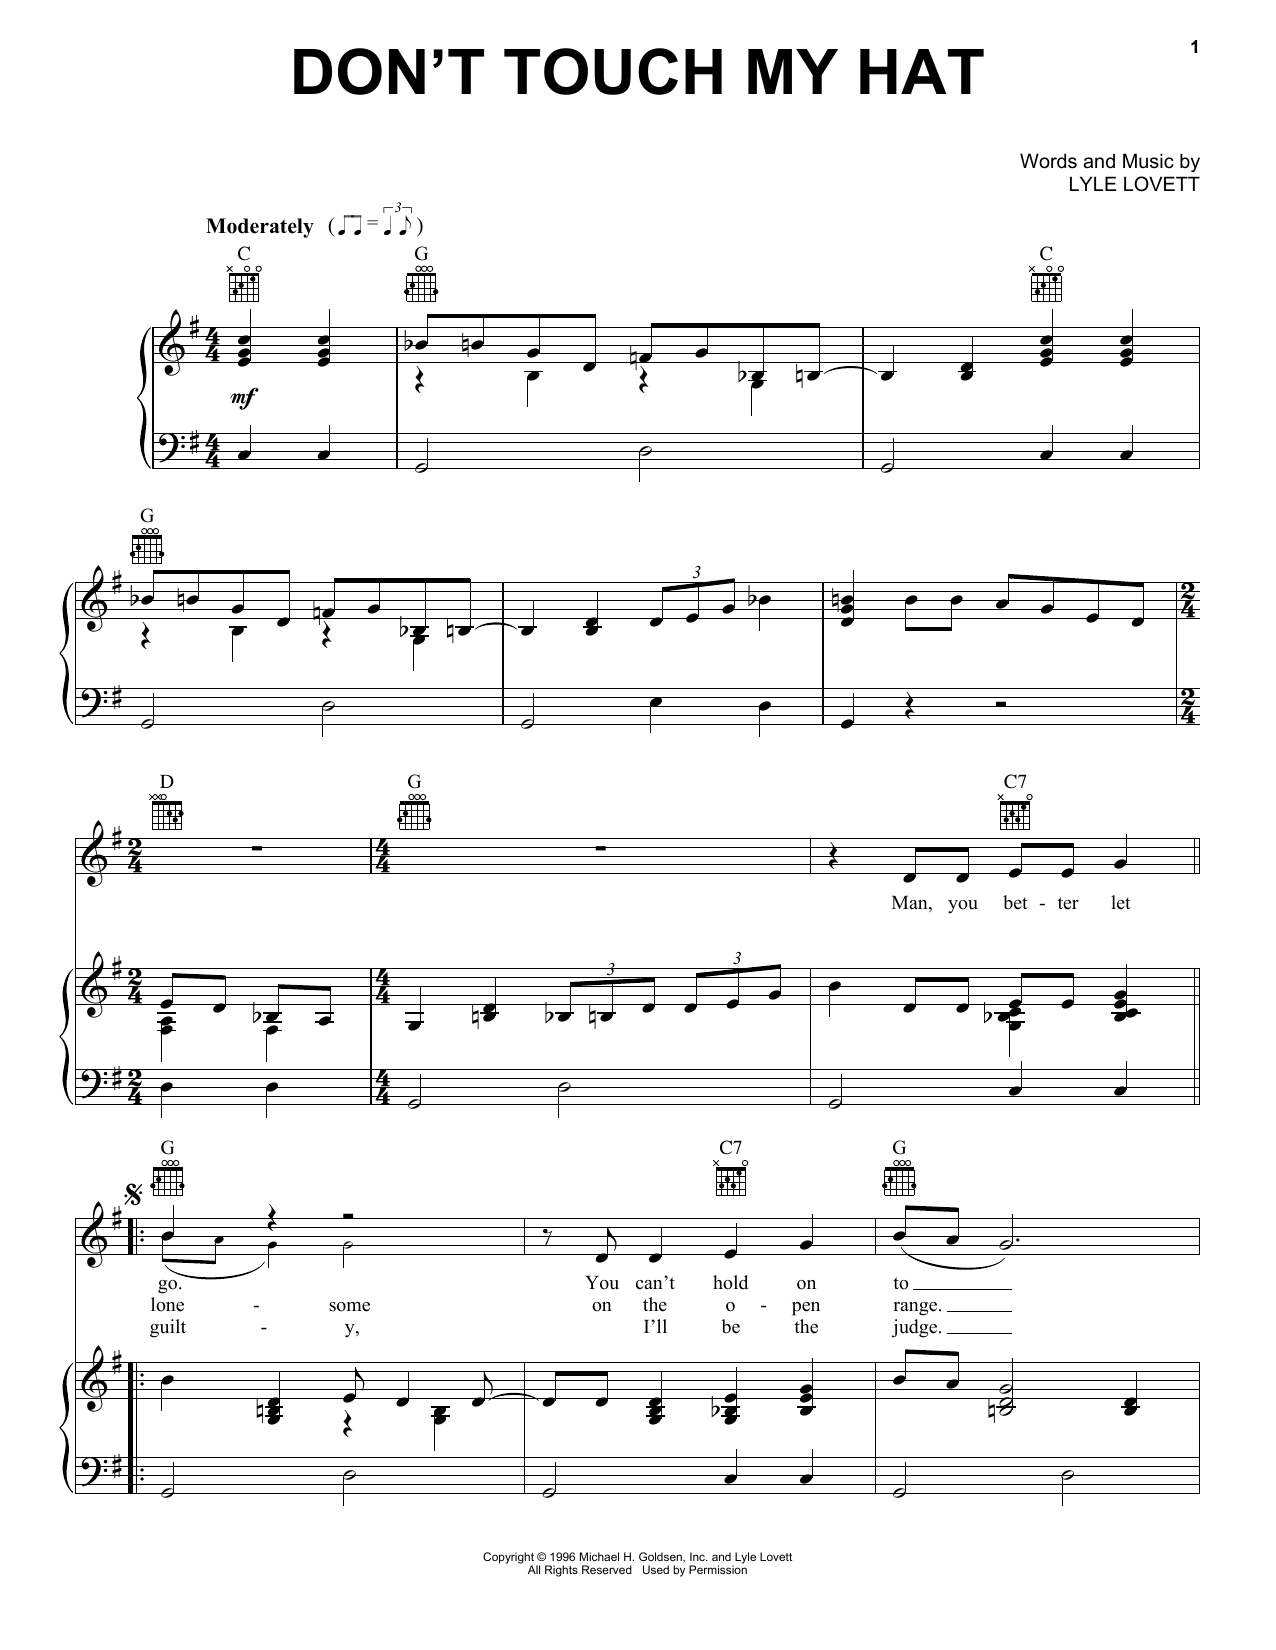 Download Lyle Lovett Don't Touch My Hat Sheet Music